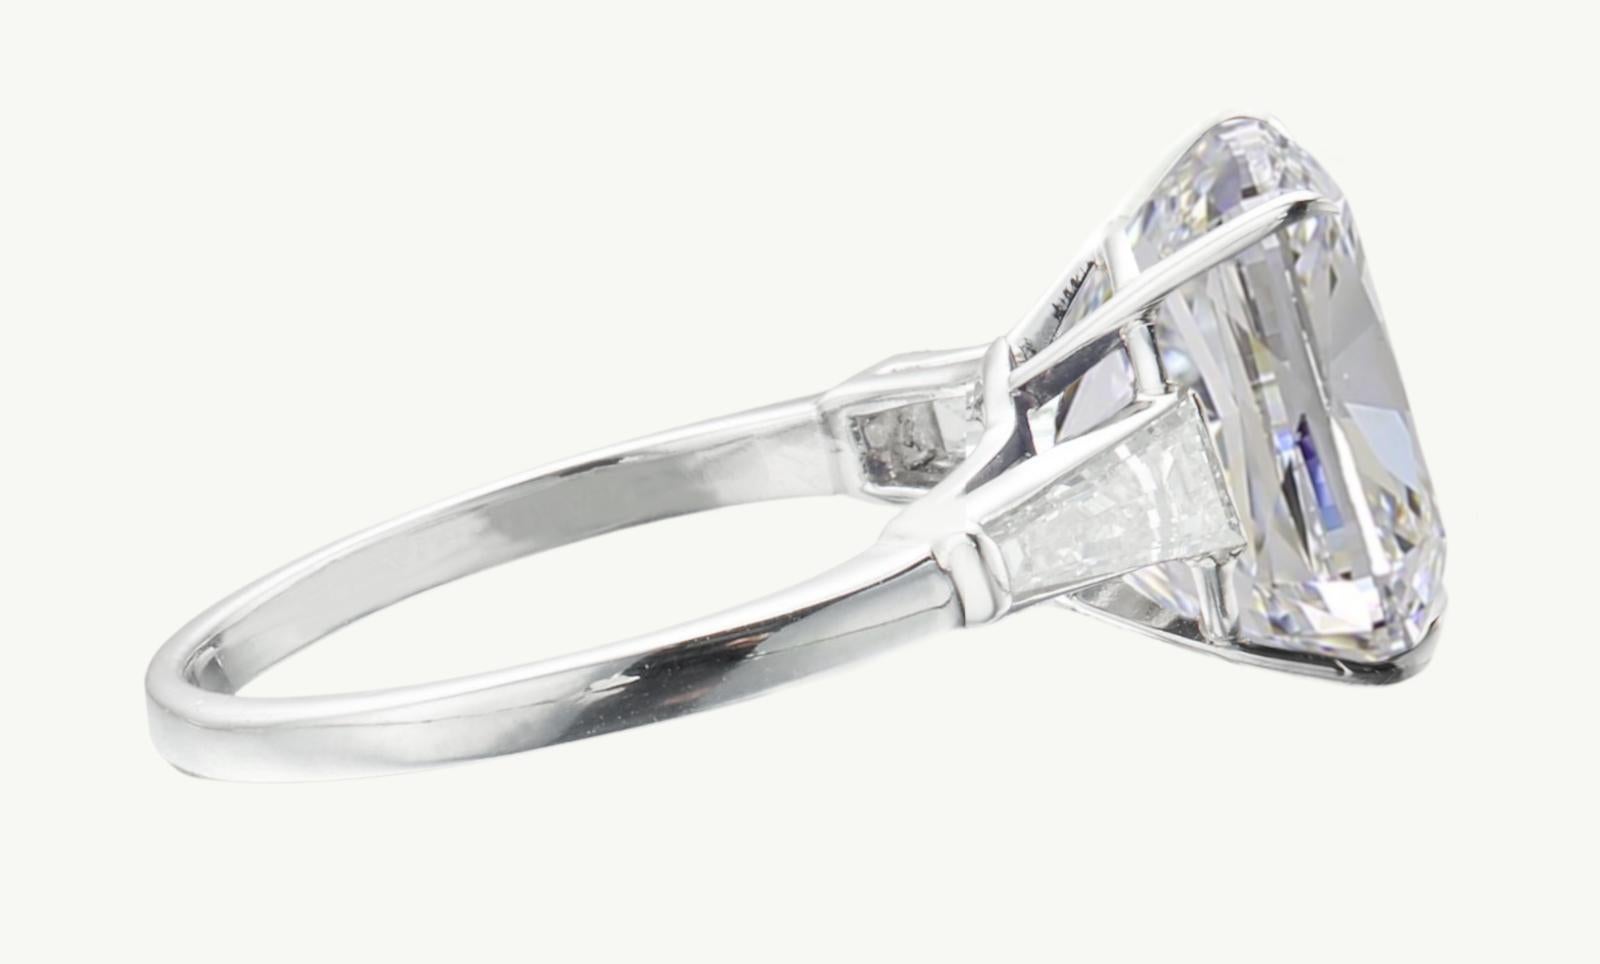 Introducing an extraordinary platinum ring that exudes timeless allure, featuring a magnificent GIA-certified cushion brilliant diamond at its focal point. The central diamond, a remarkable 5 carats, boasts impeccable characteristics: E color, VS